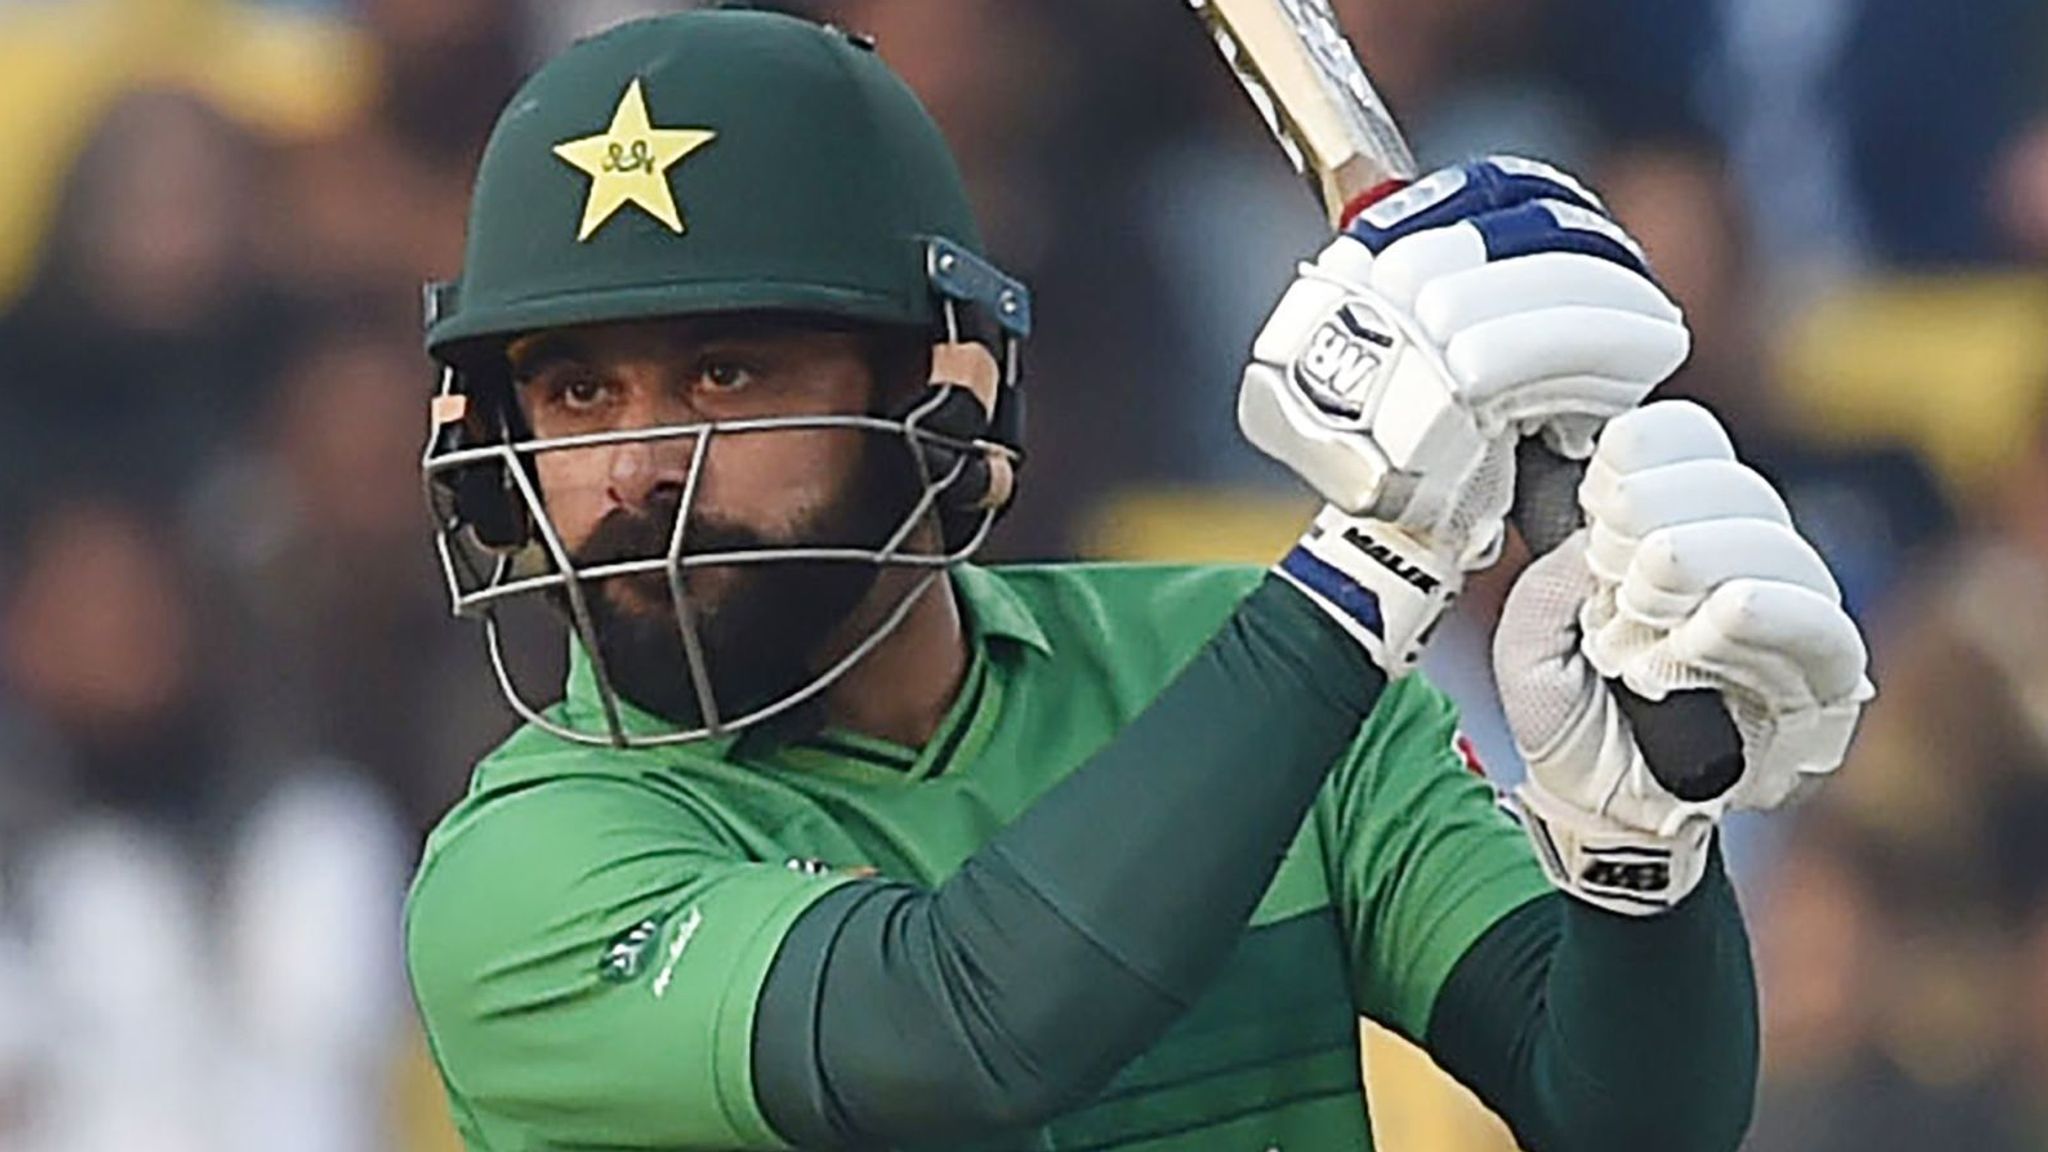 Pakistan's Mohammad Hafeez says he has tested negative for coronavirus after second screening